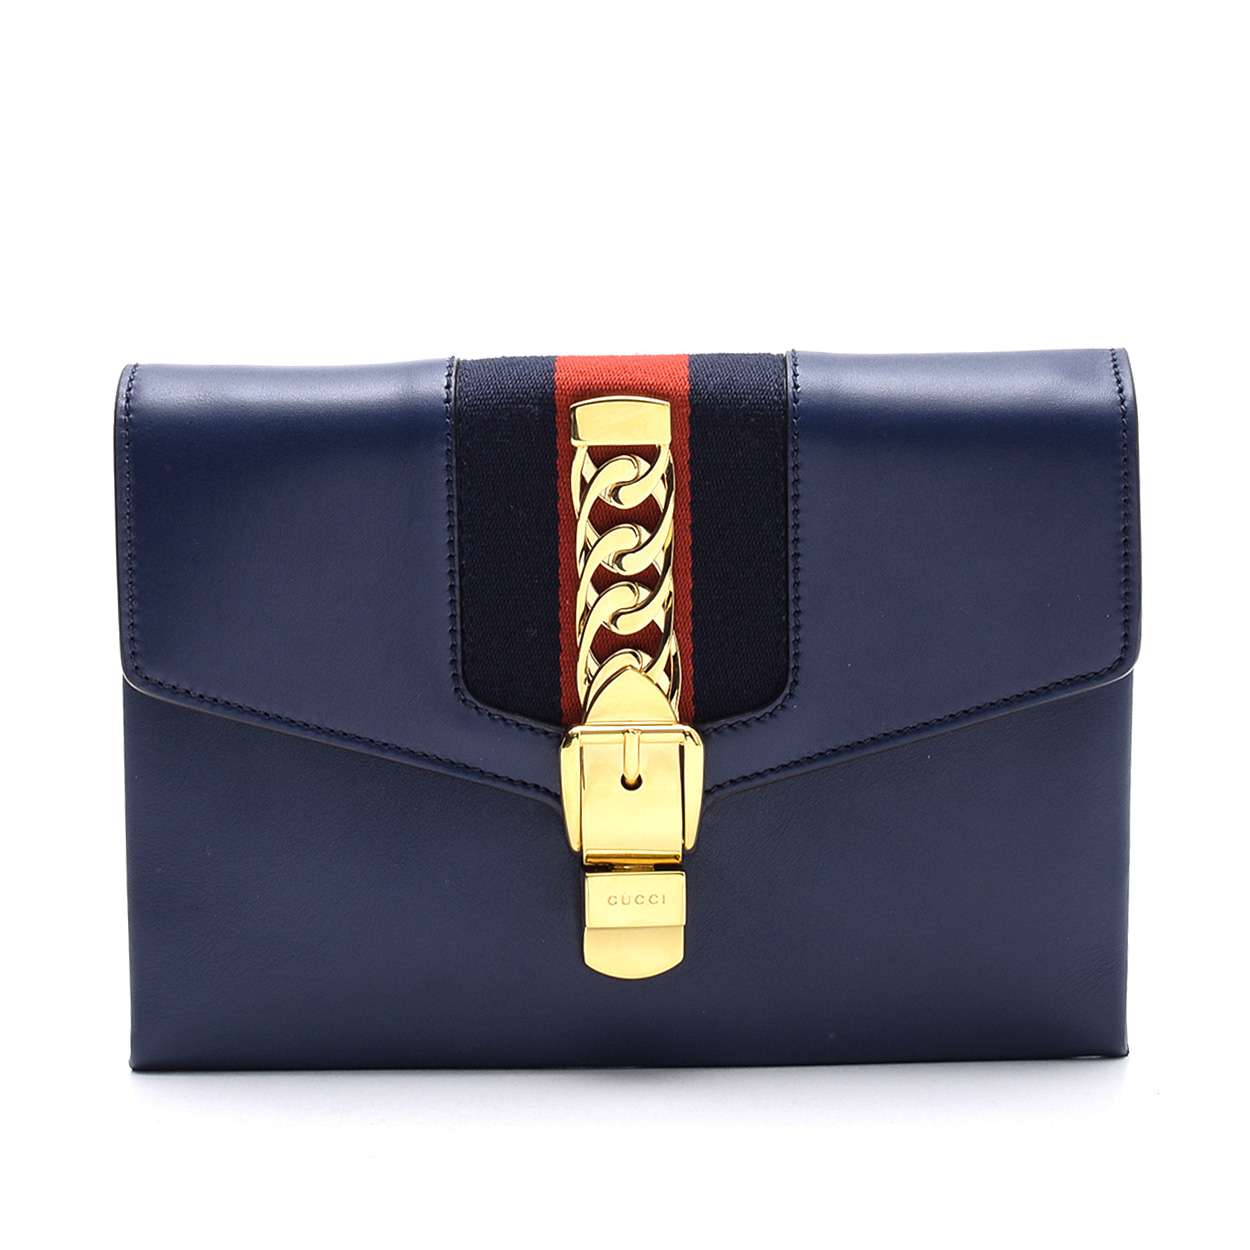 Gucci - Navy Blue Sylive Signature Webbing and Curb Chain Clutch